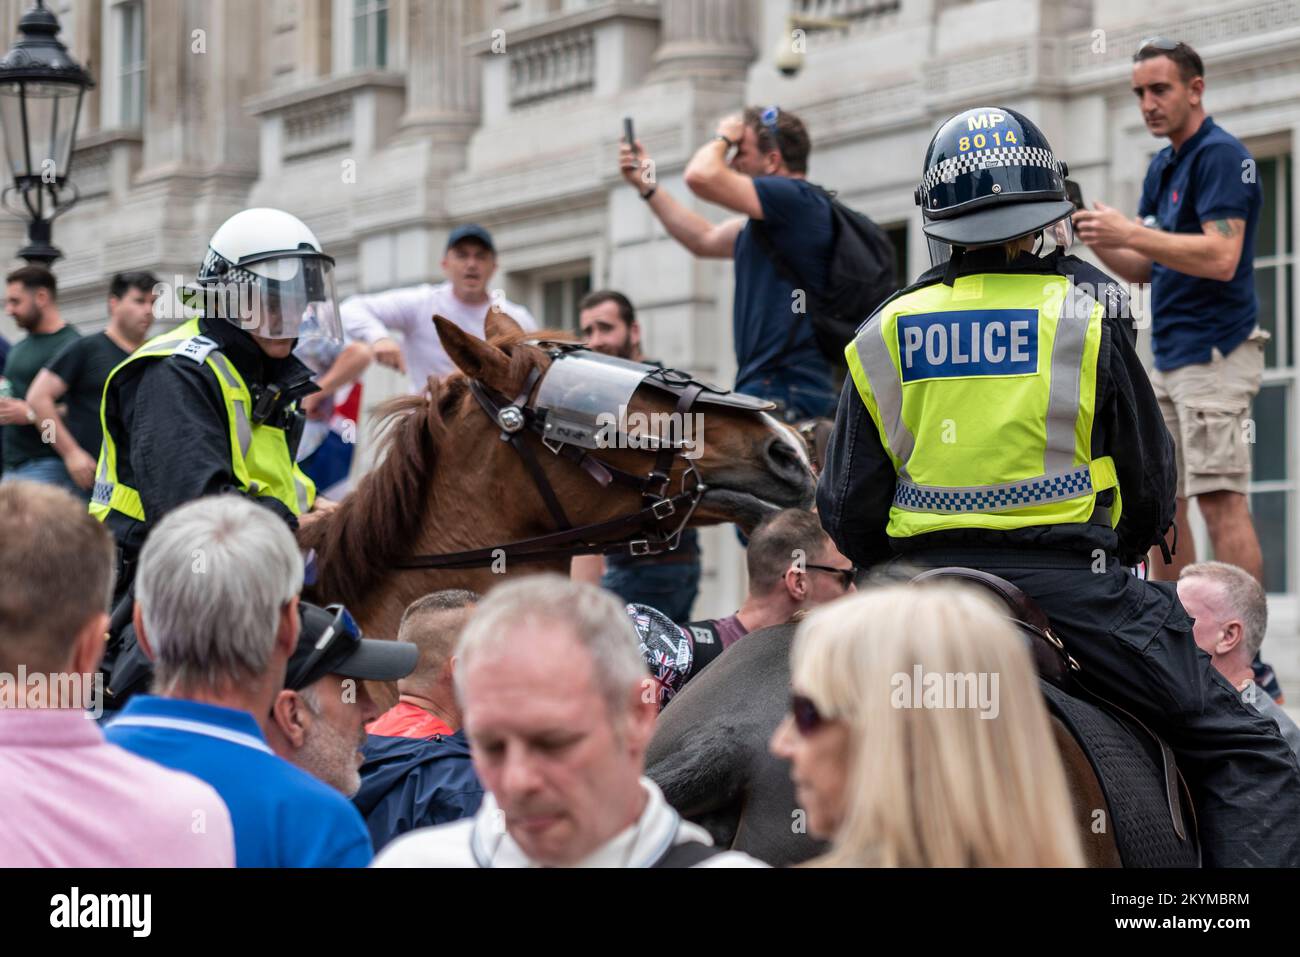 Supporters of Tommy Robinson, such as the EDL protested in London demonstrating for his release after arrest. Mounted police officers among protesters Stock Photo